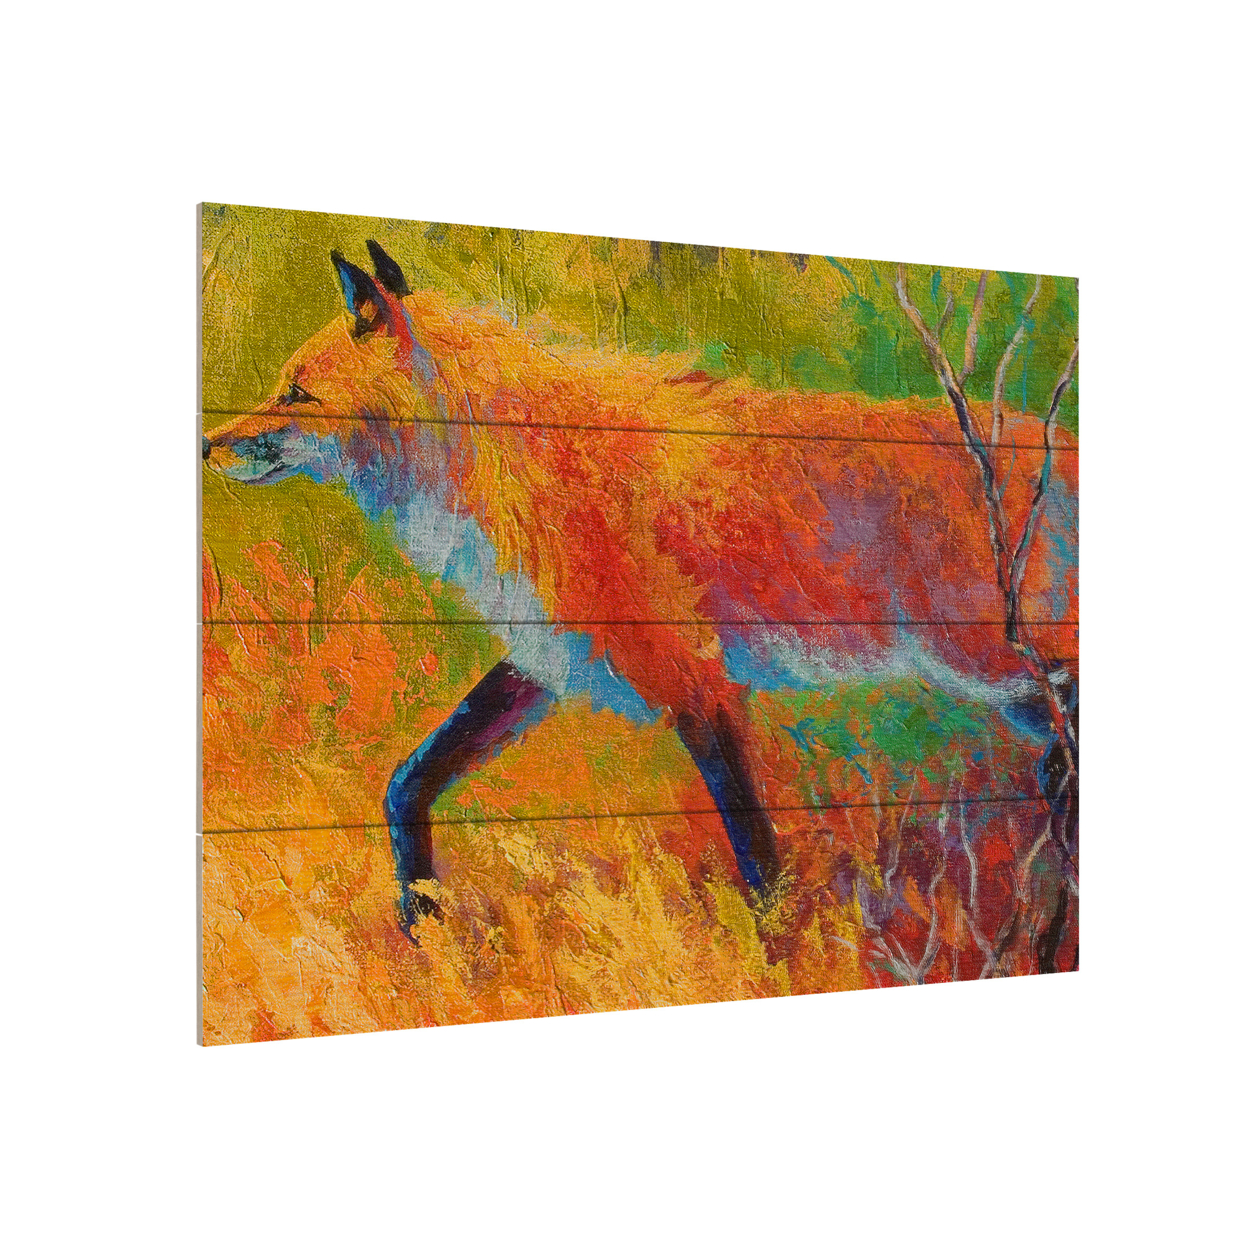 Wall Art 12 X 16 Inches Titled Red Fox 1 Ready To Hang Printed On Wooden Planks